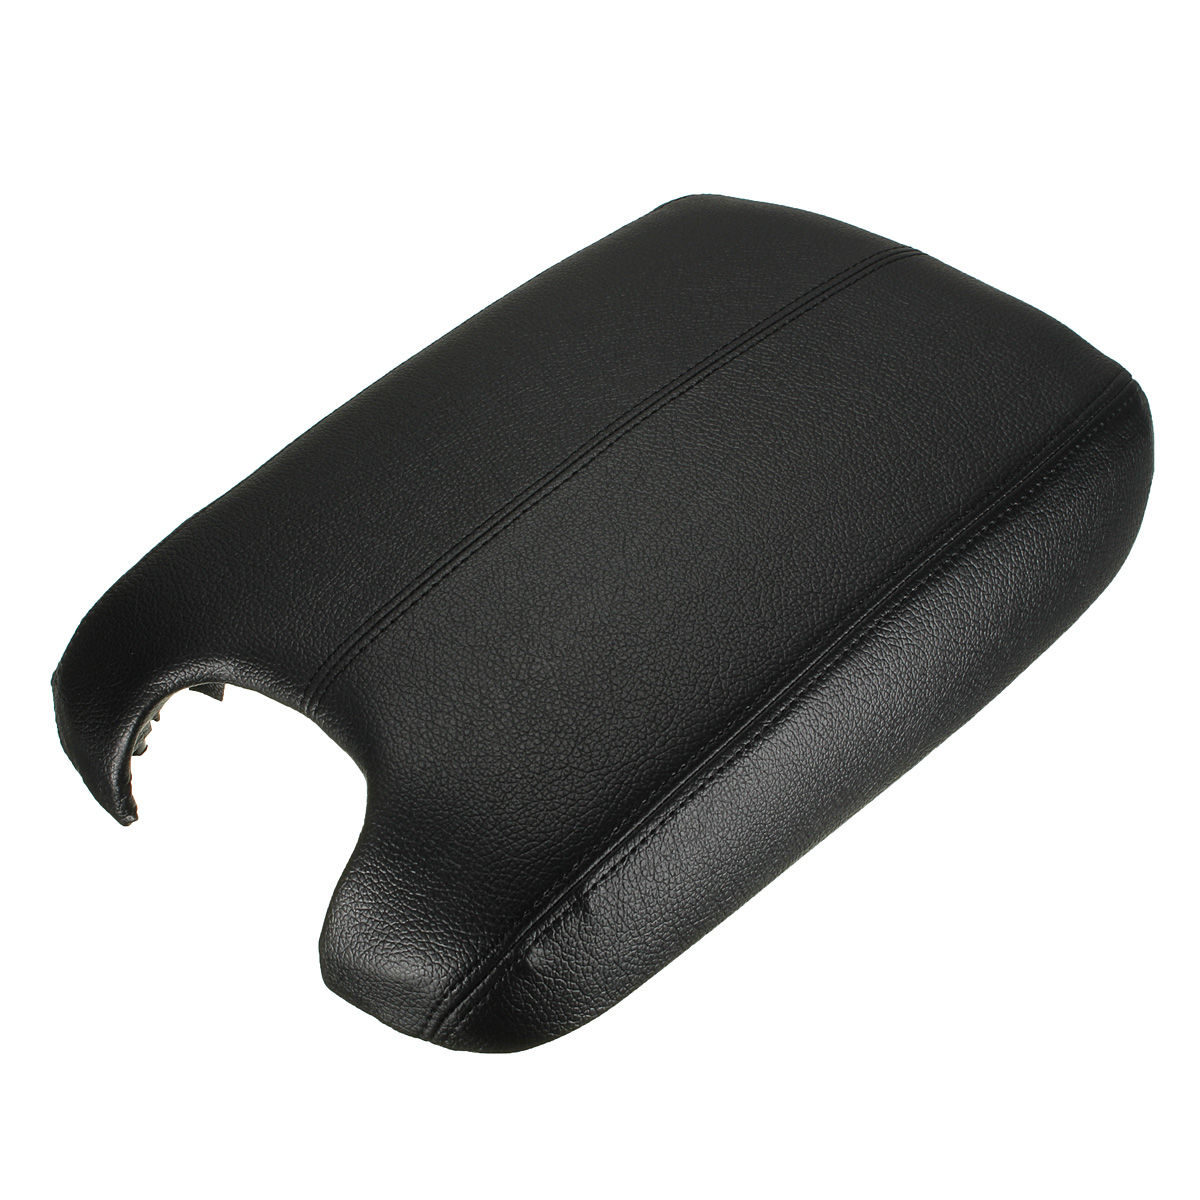 2008 Honda accord console armrest cover